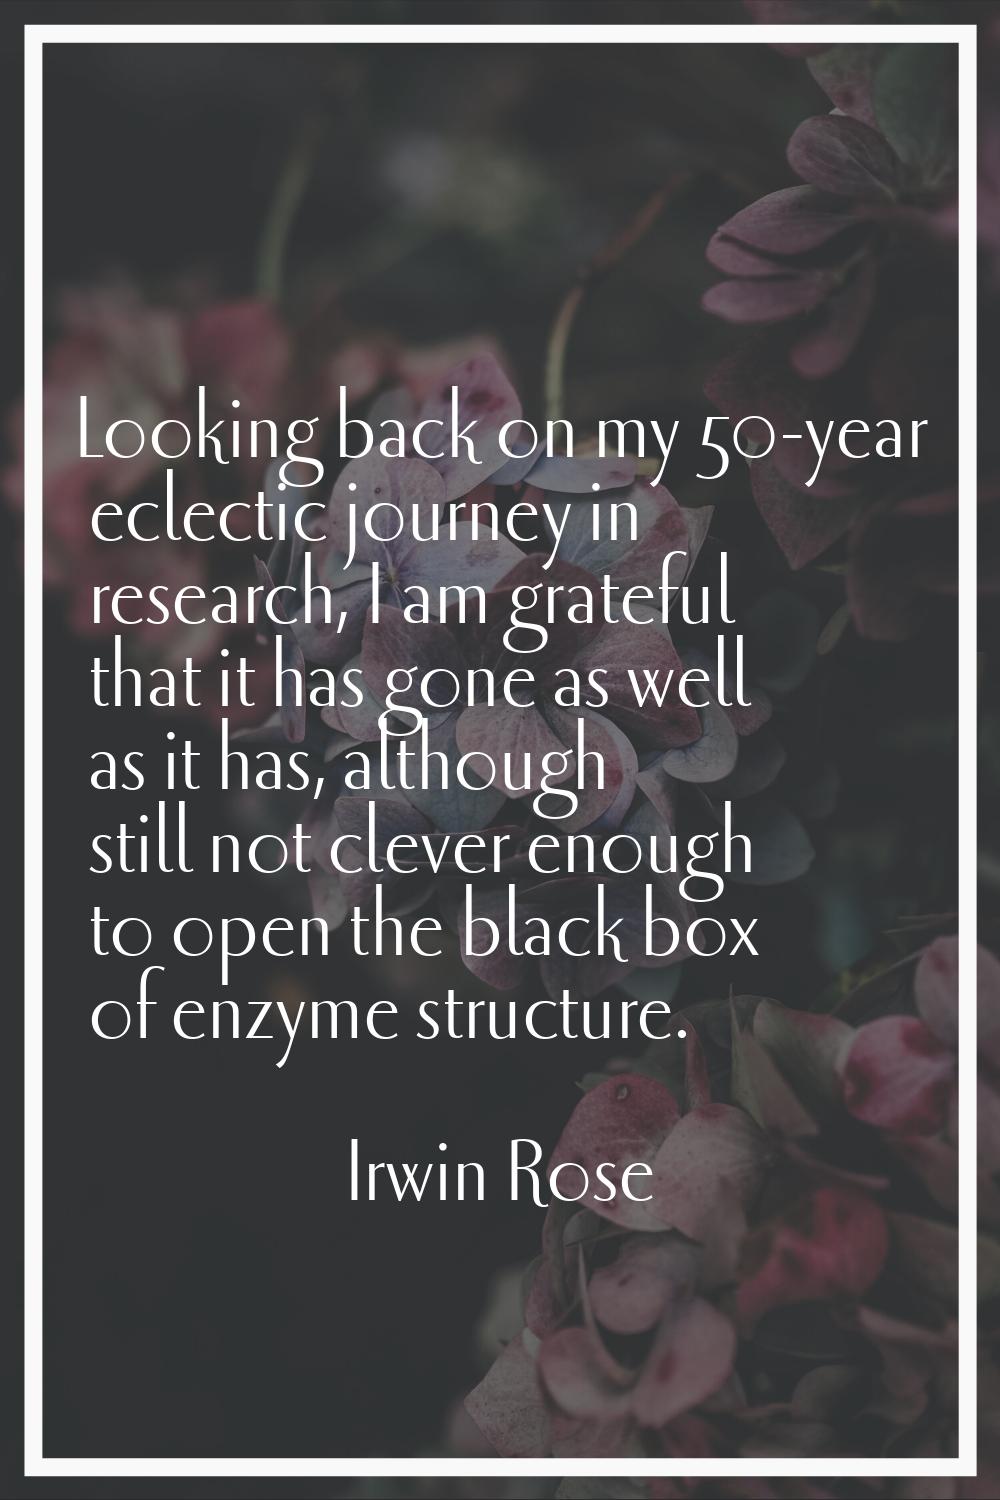 Looking back on my 50-year eclectic journey in research, I am grateful that it has gone as well as 